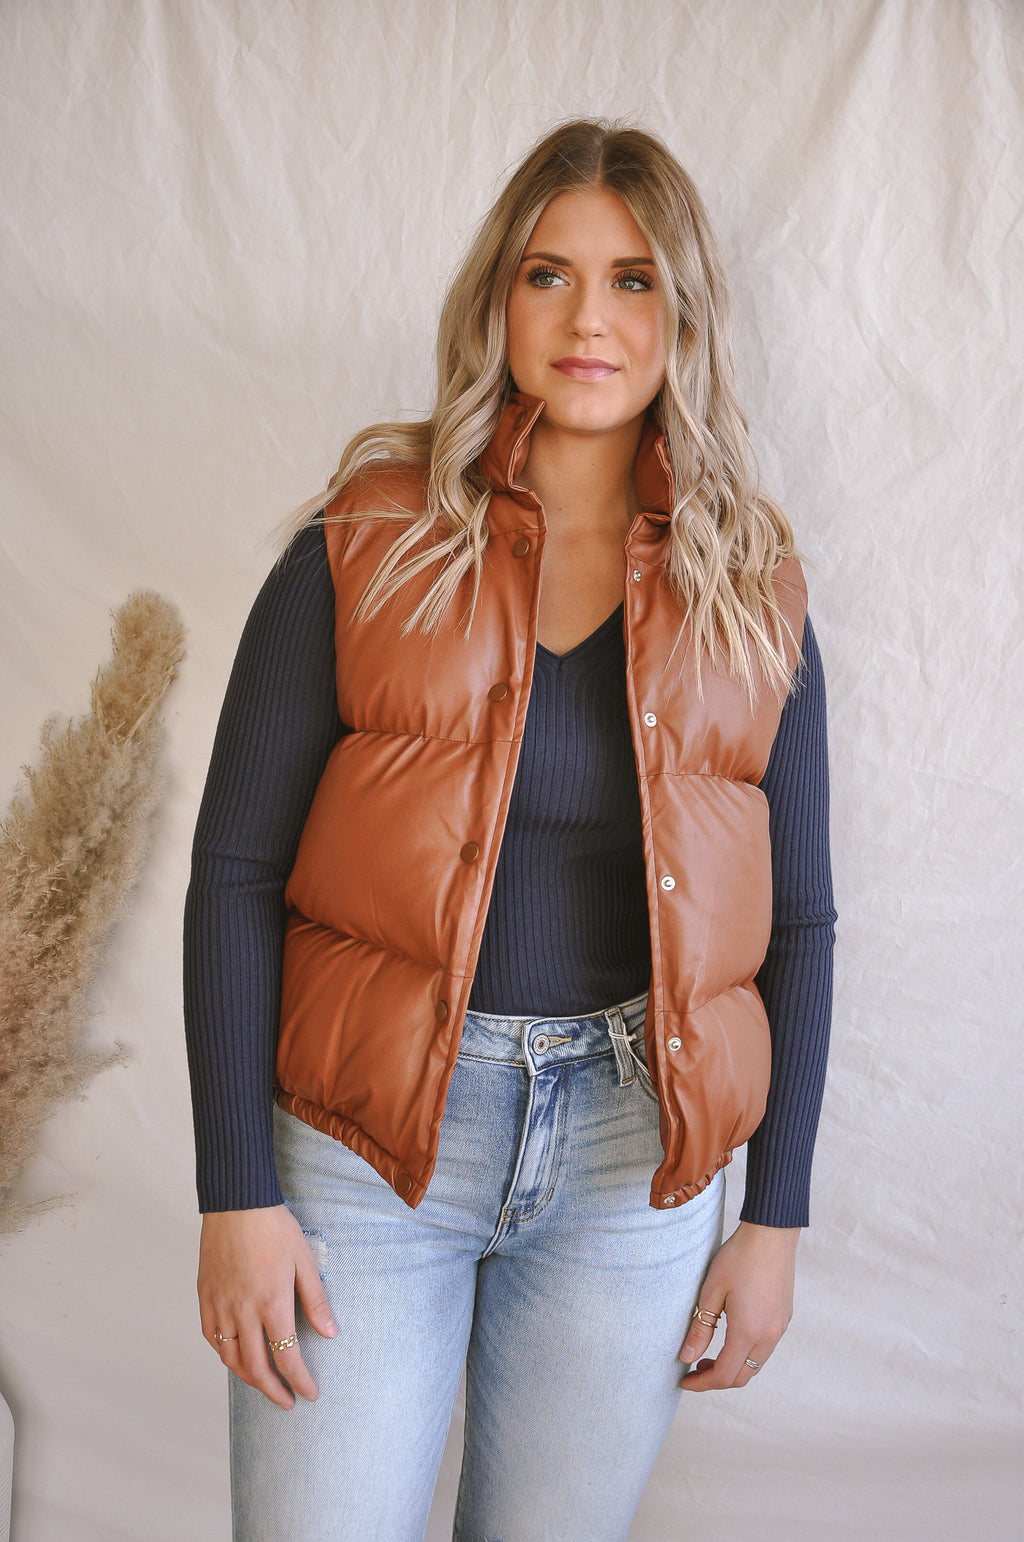 Women's Brown Puffer Vest- Brown Cropped Puffer Vest- Entro Clothing Vest Small